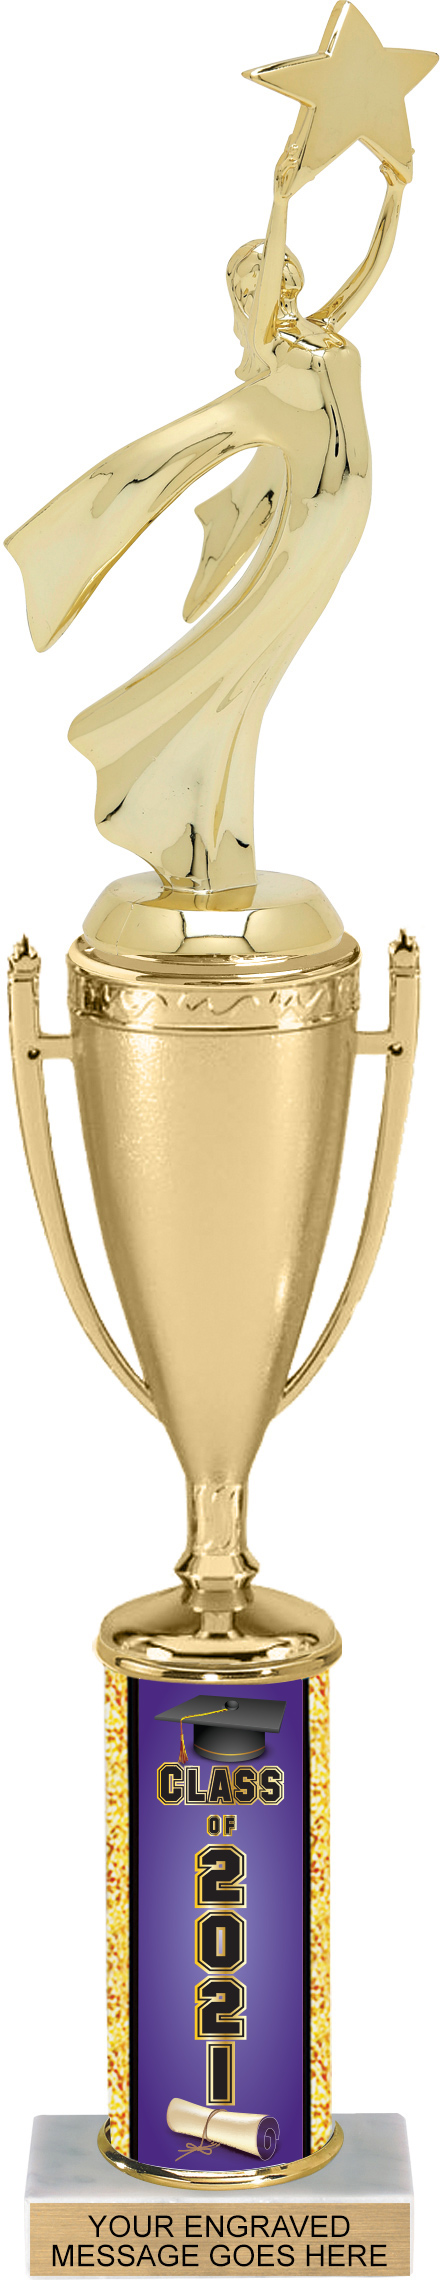 Class of 2021 15 inch Column Cup Trophy